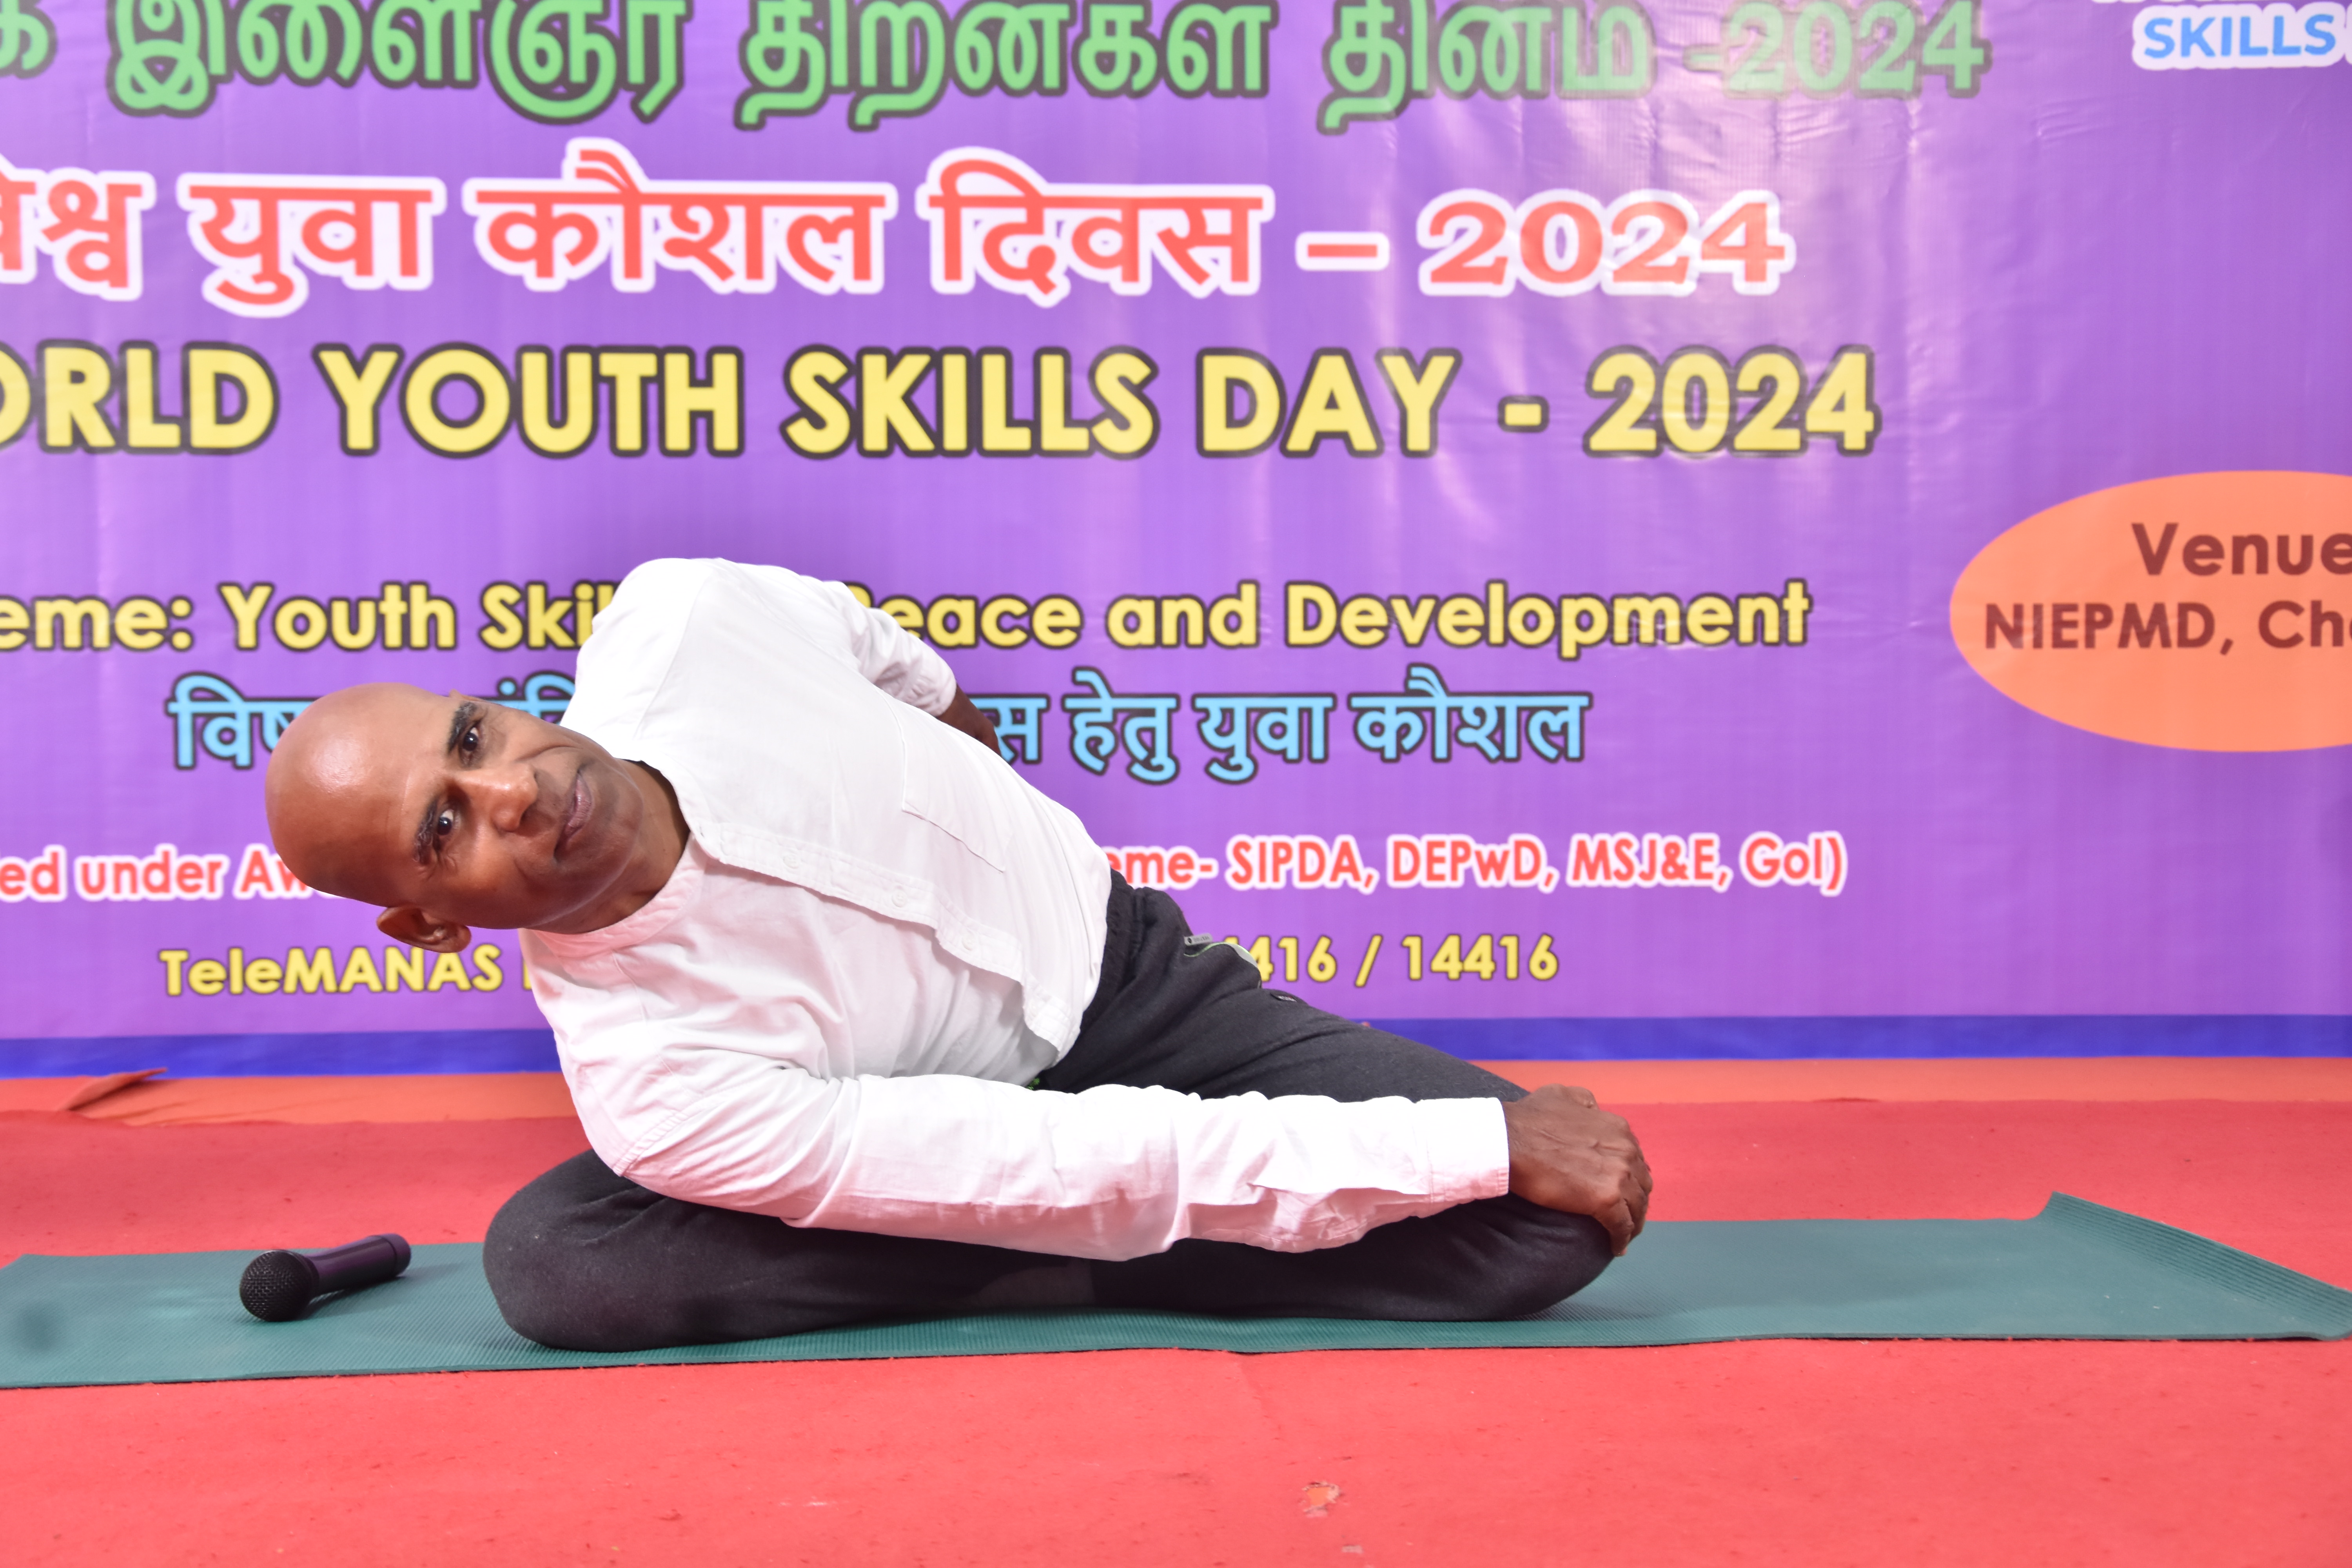 Resource Person Shri.Jothi Arumugam, Master Coach, Myholism, delivering the topic on Life Skills and Yoga Towards sustainable Mental Health for PwDs